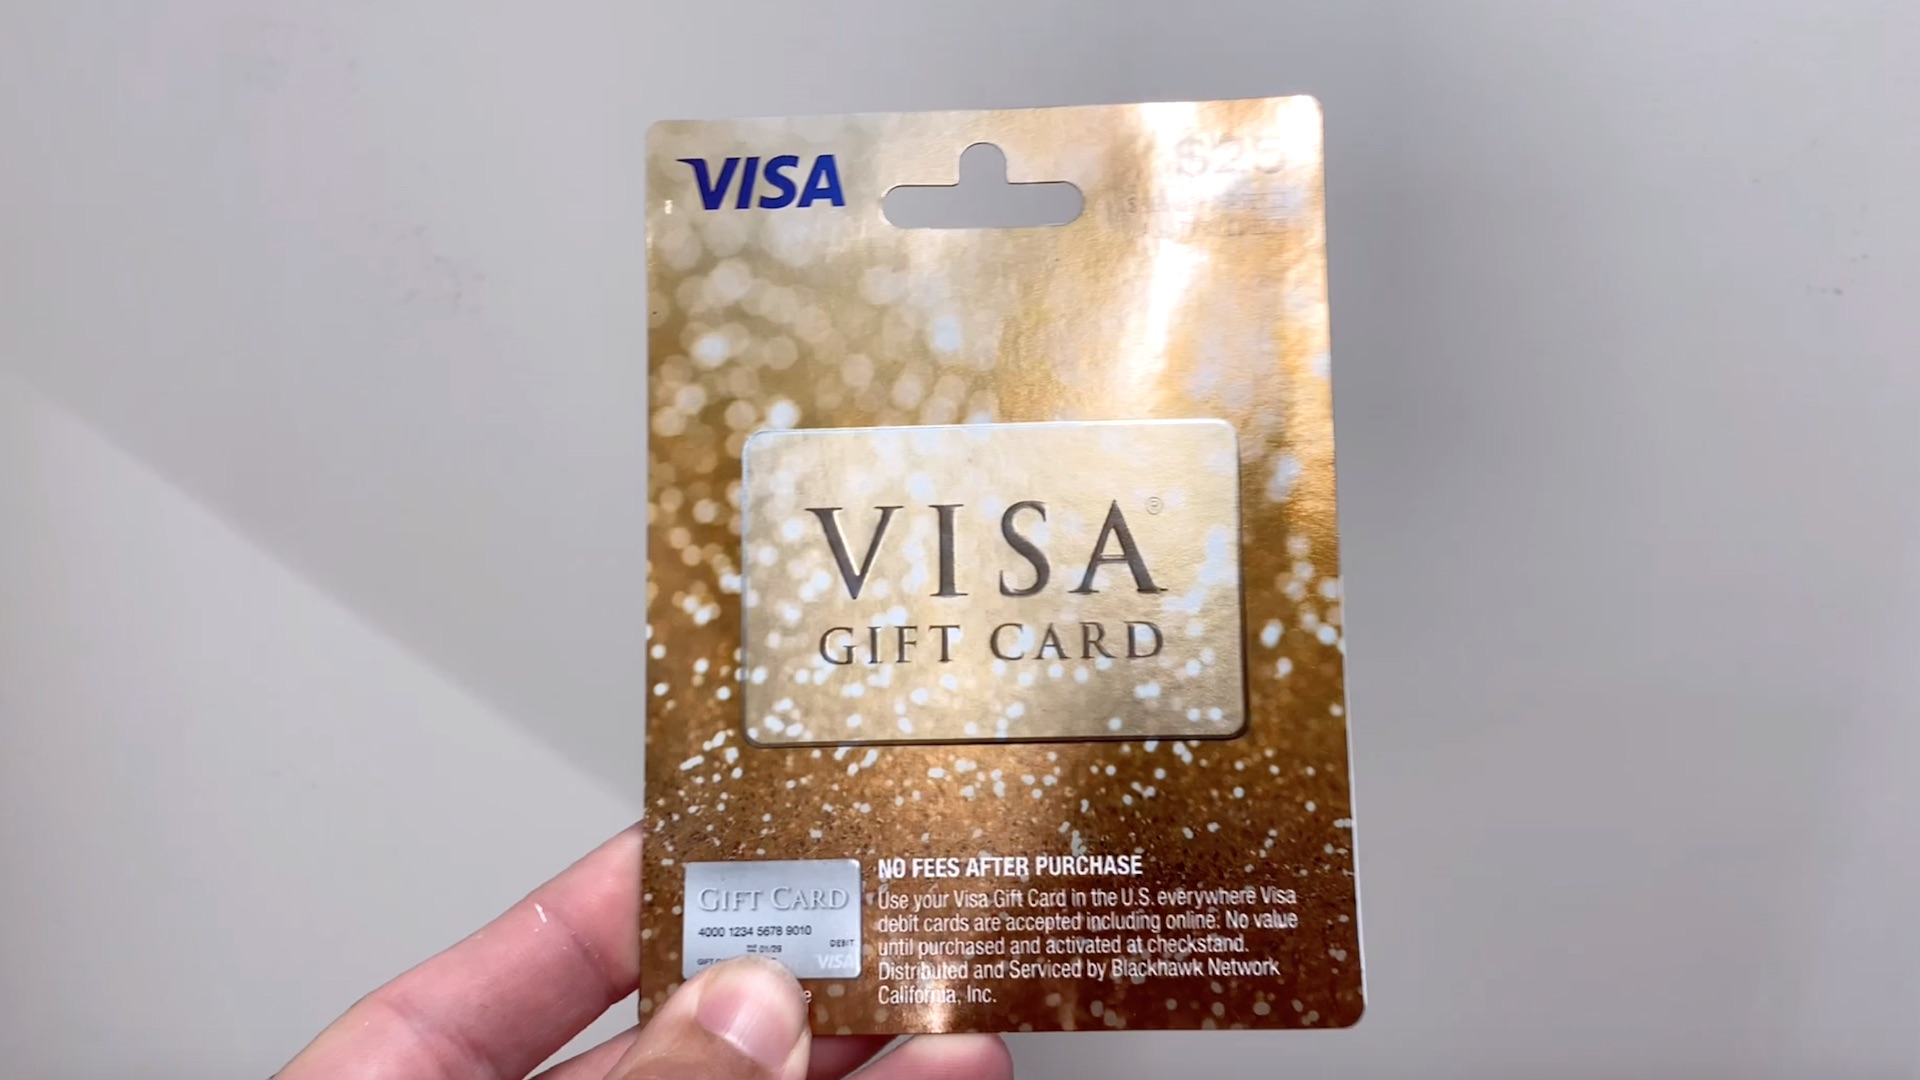 How To Pay With VISA Gift Card On Amazon